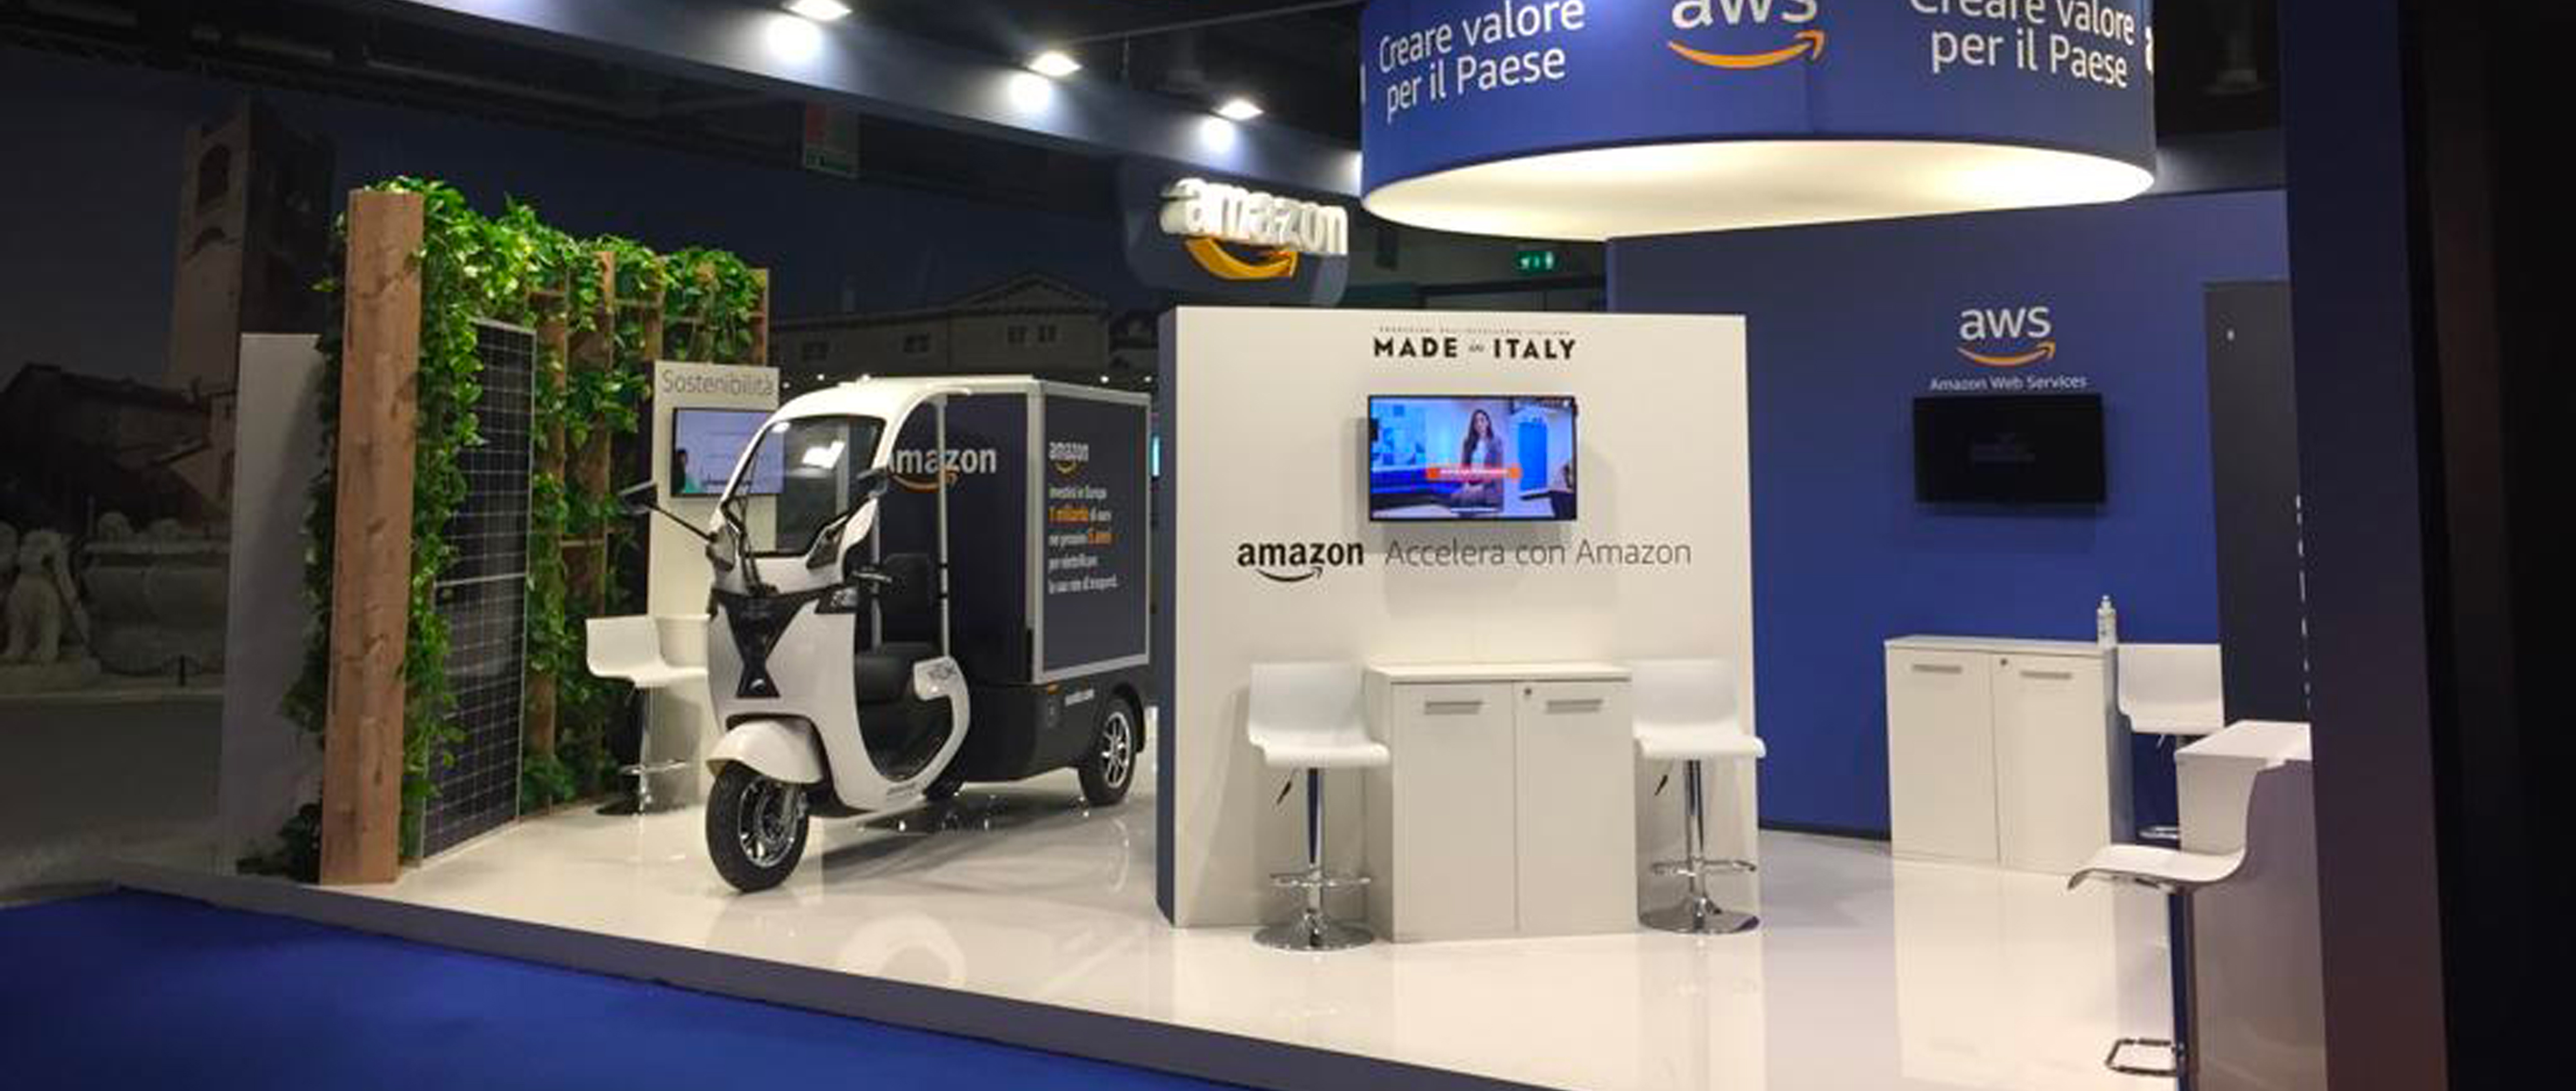 Pods with monitors introducing Amazon services at the ANCI stand